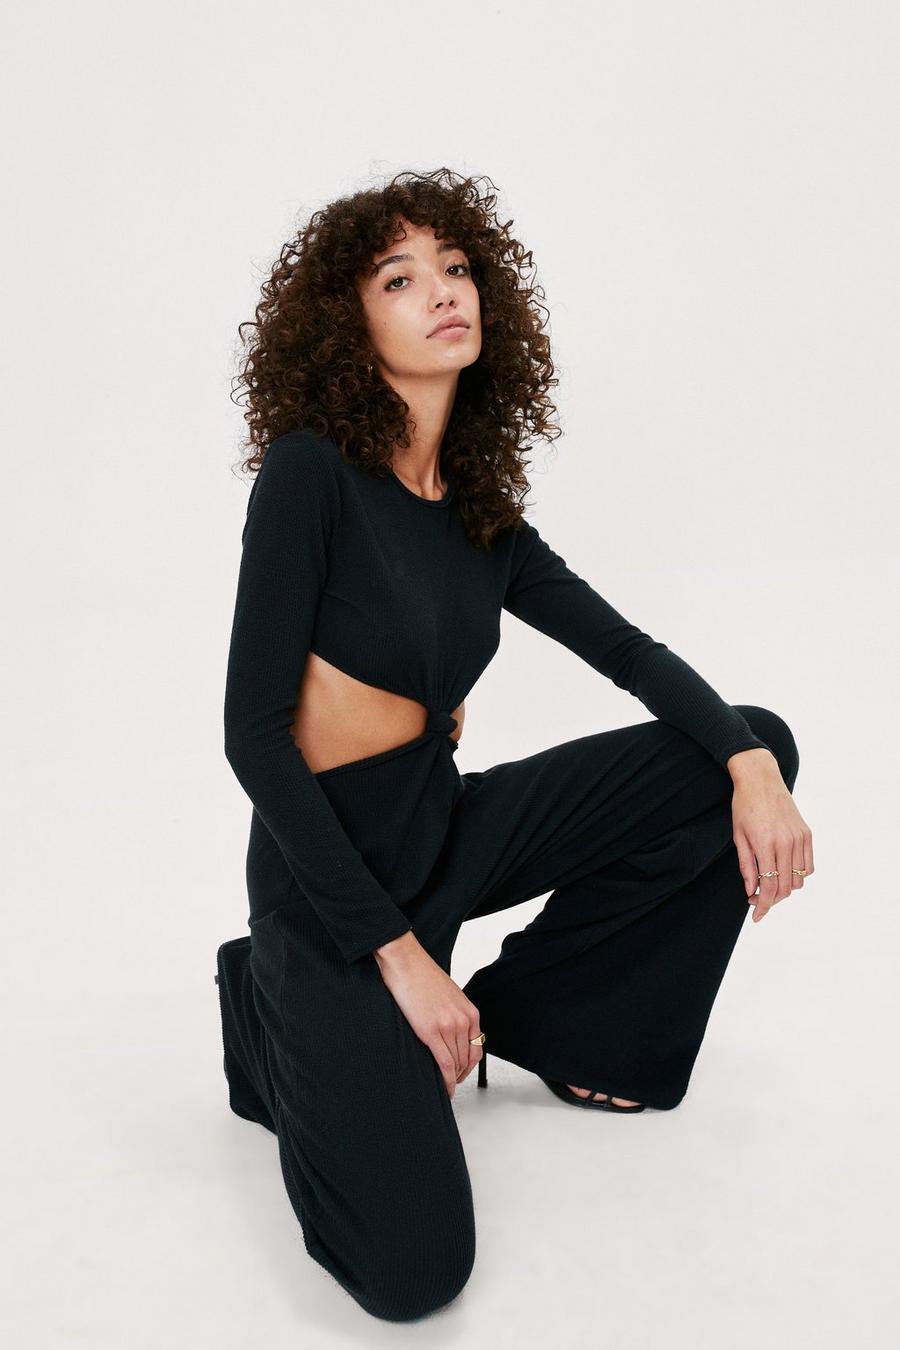 Rib Knot Front Long Sleeve Jumpsuit